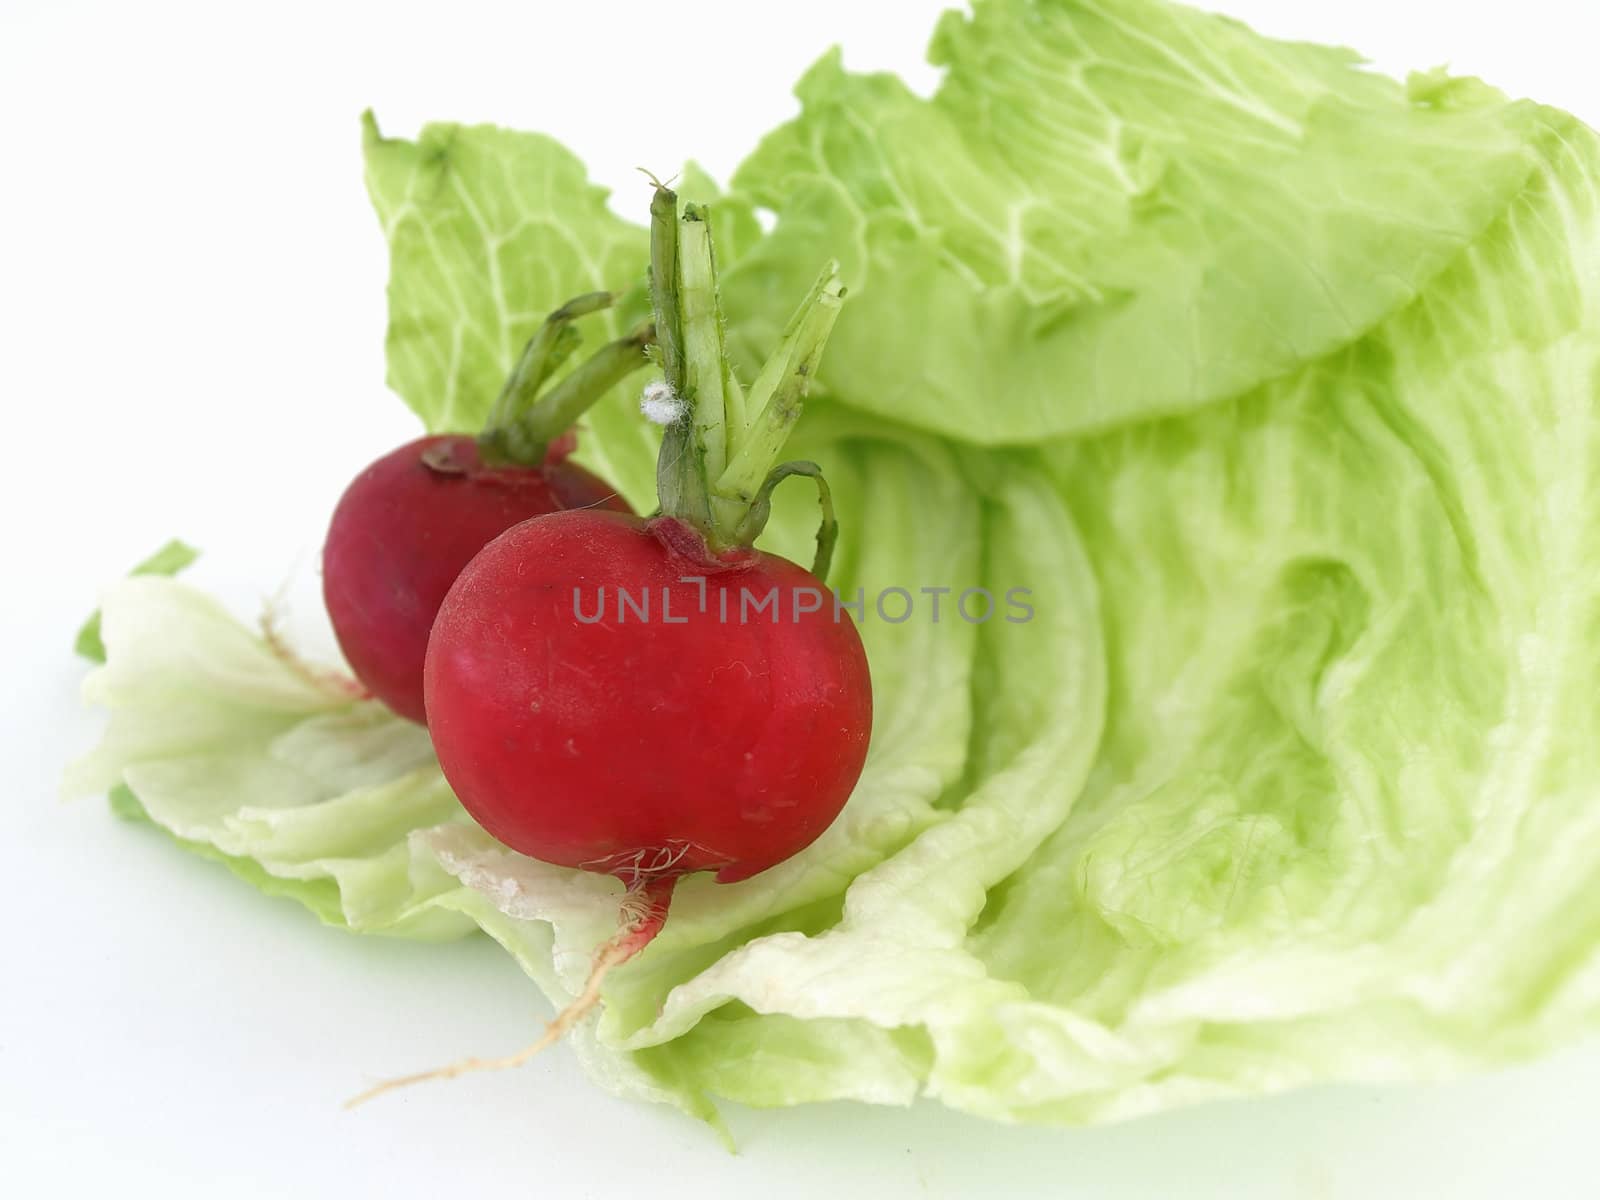 Two radishes and some lettuce studio isolated on a white background.